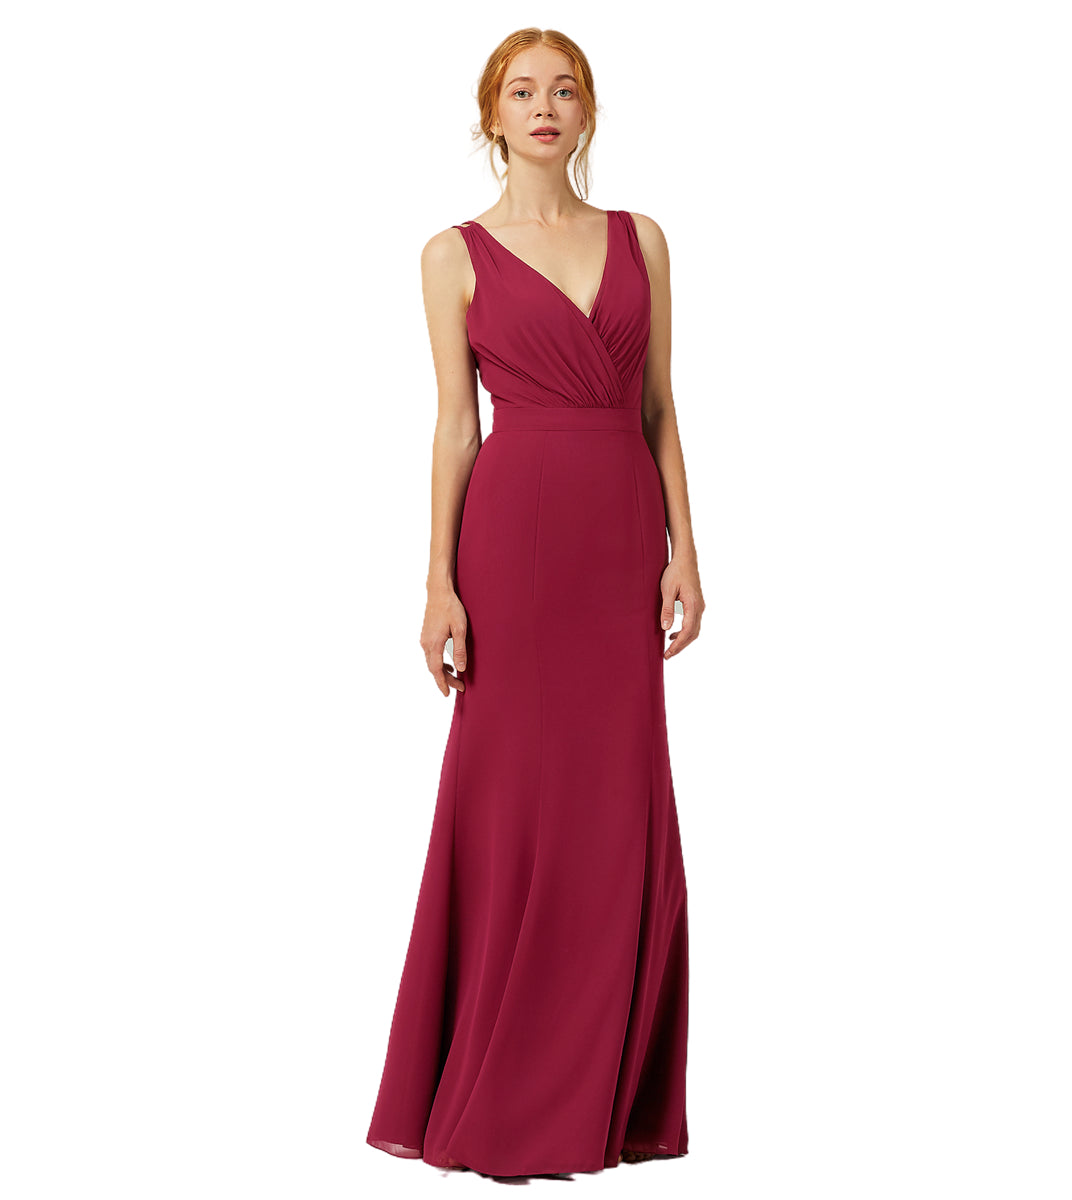 Cocomelody Women Lovely Chiffon Sheath-Column Floor Length Regular and Plus Size Dress Night Out Bridesmaid Dress CB0291